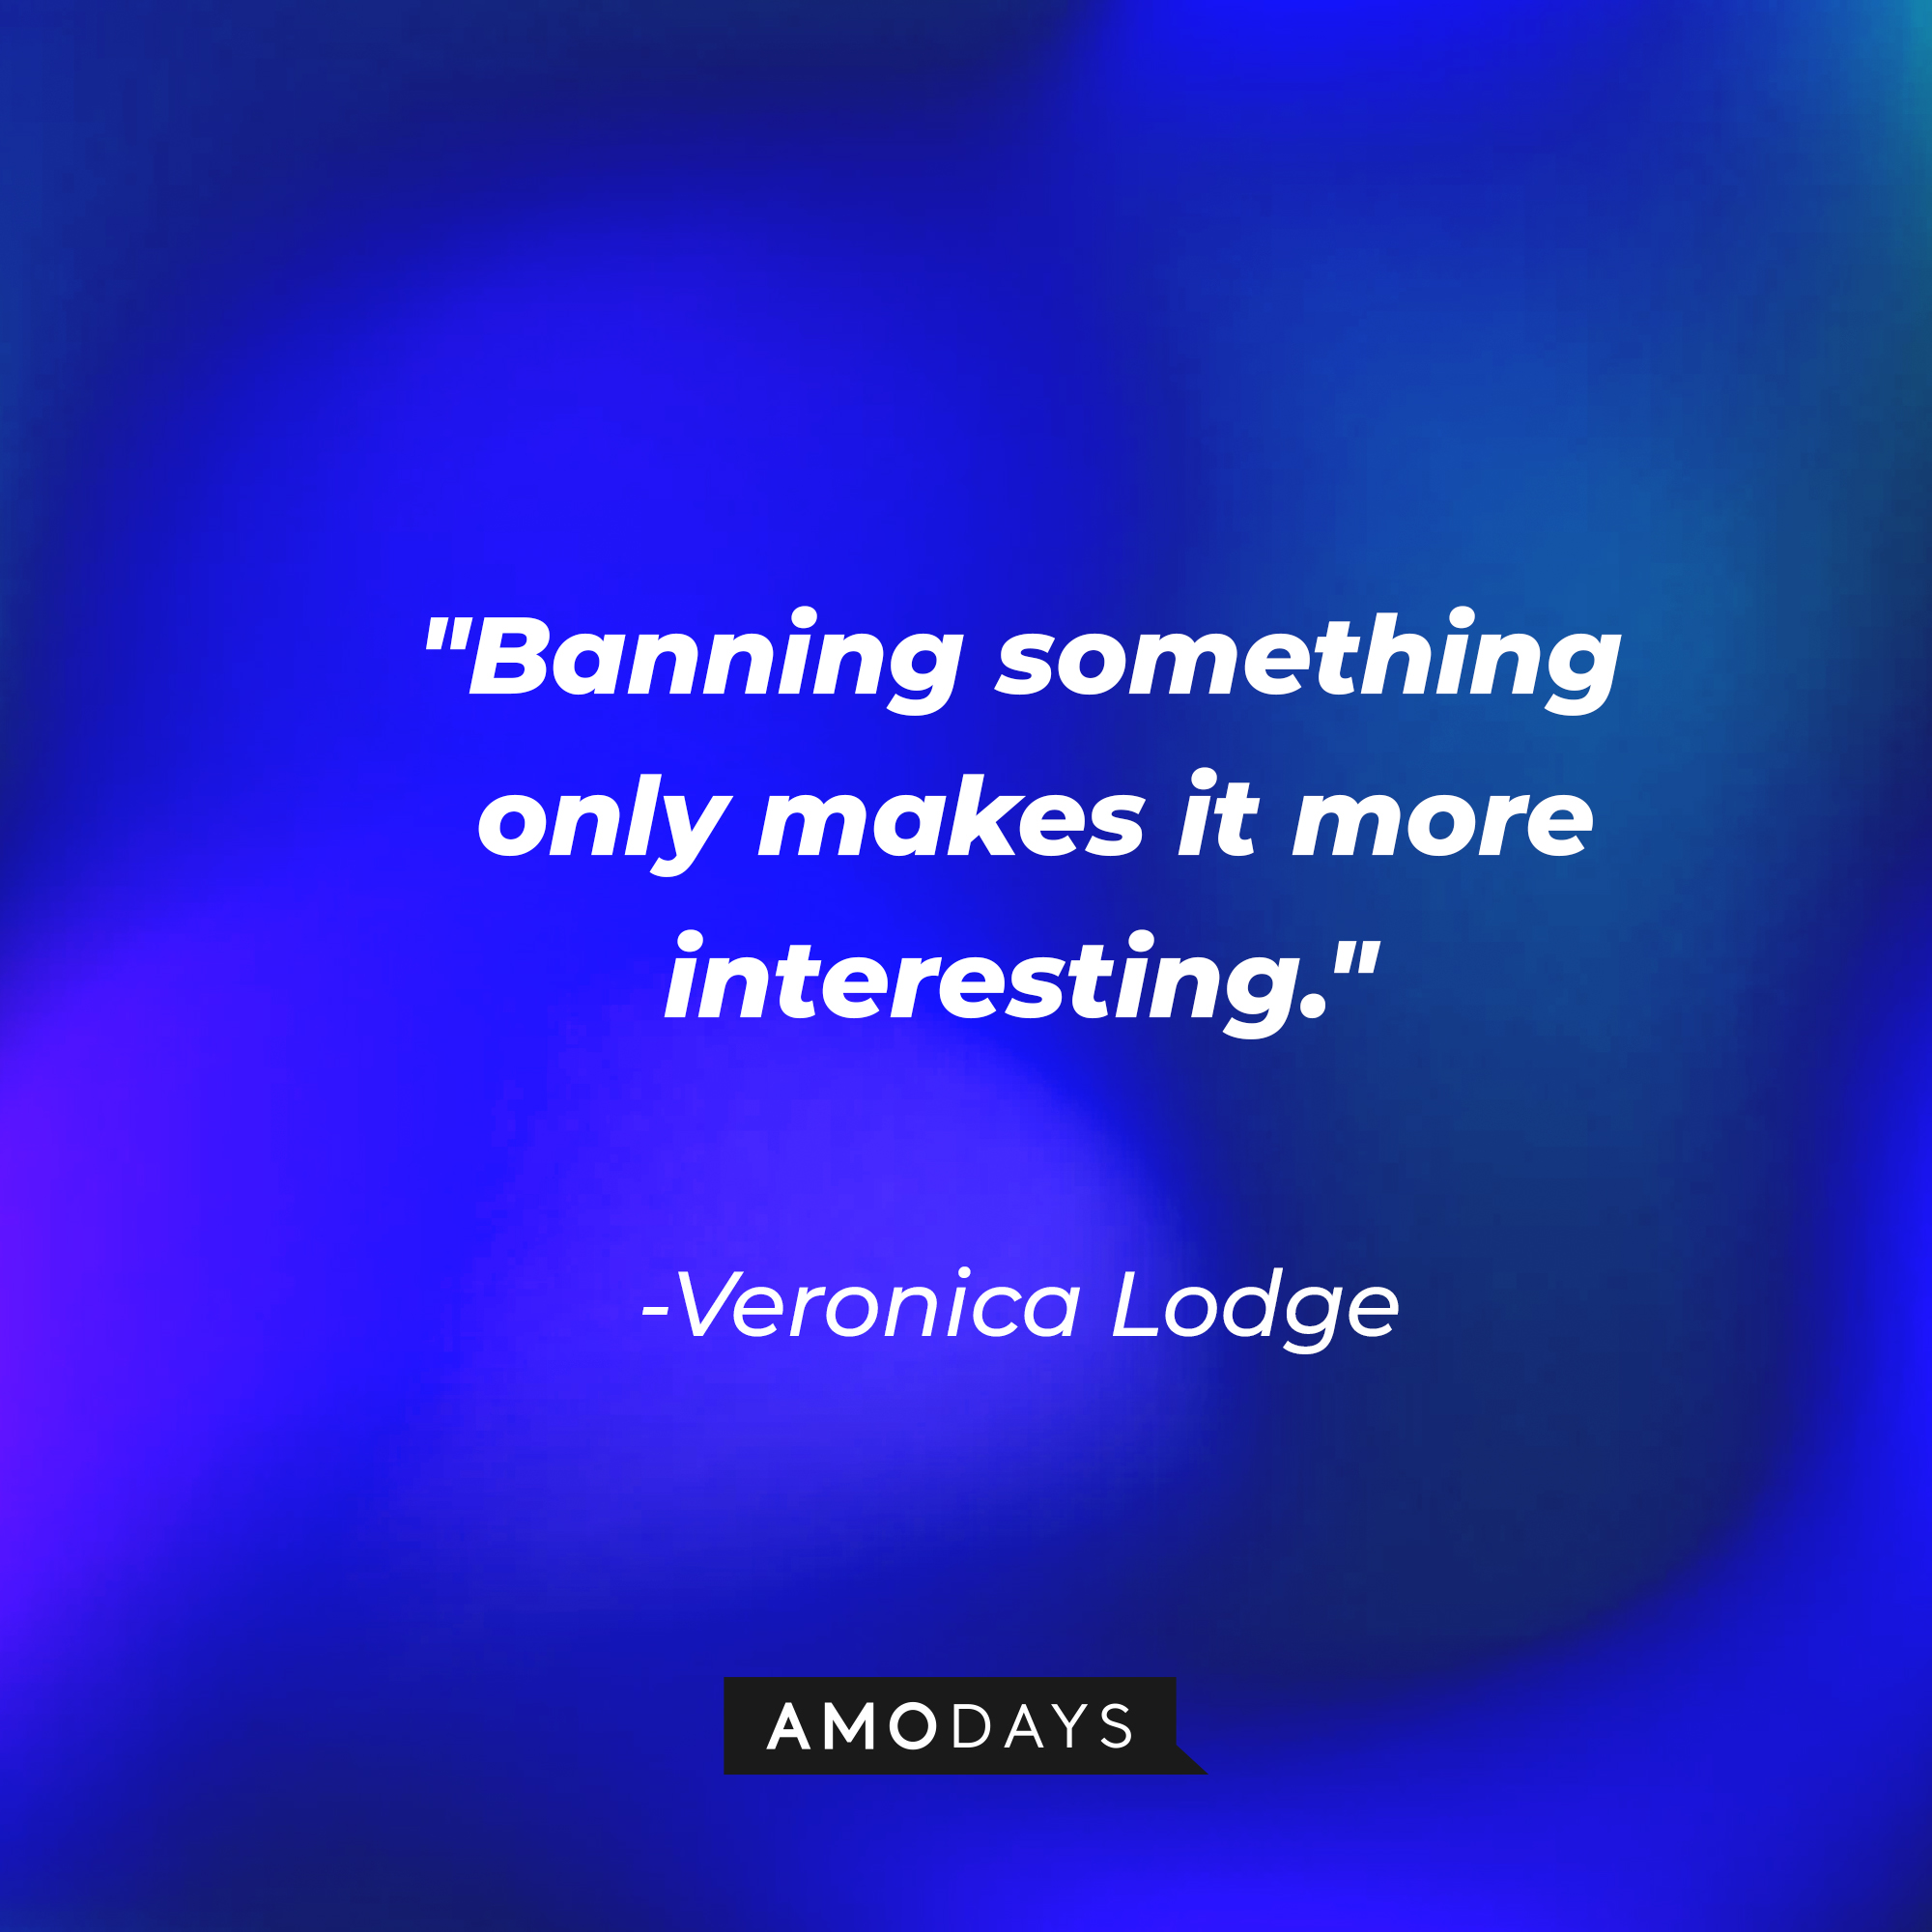 Veronica Lodge's quote: "Banning something only makes it more interesting." | Source: AmoDays